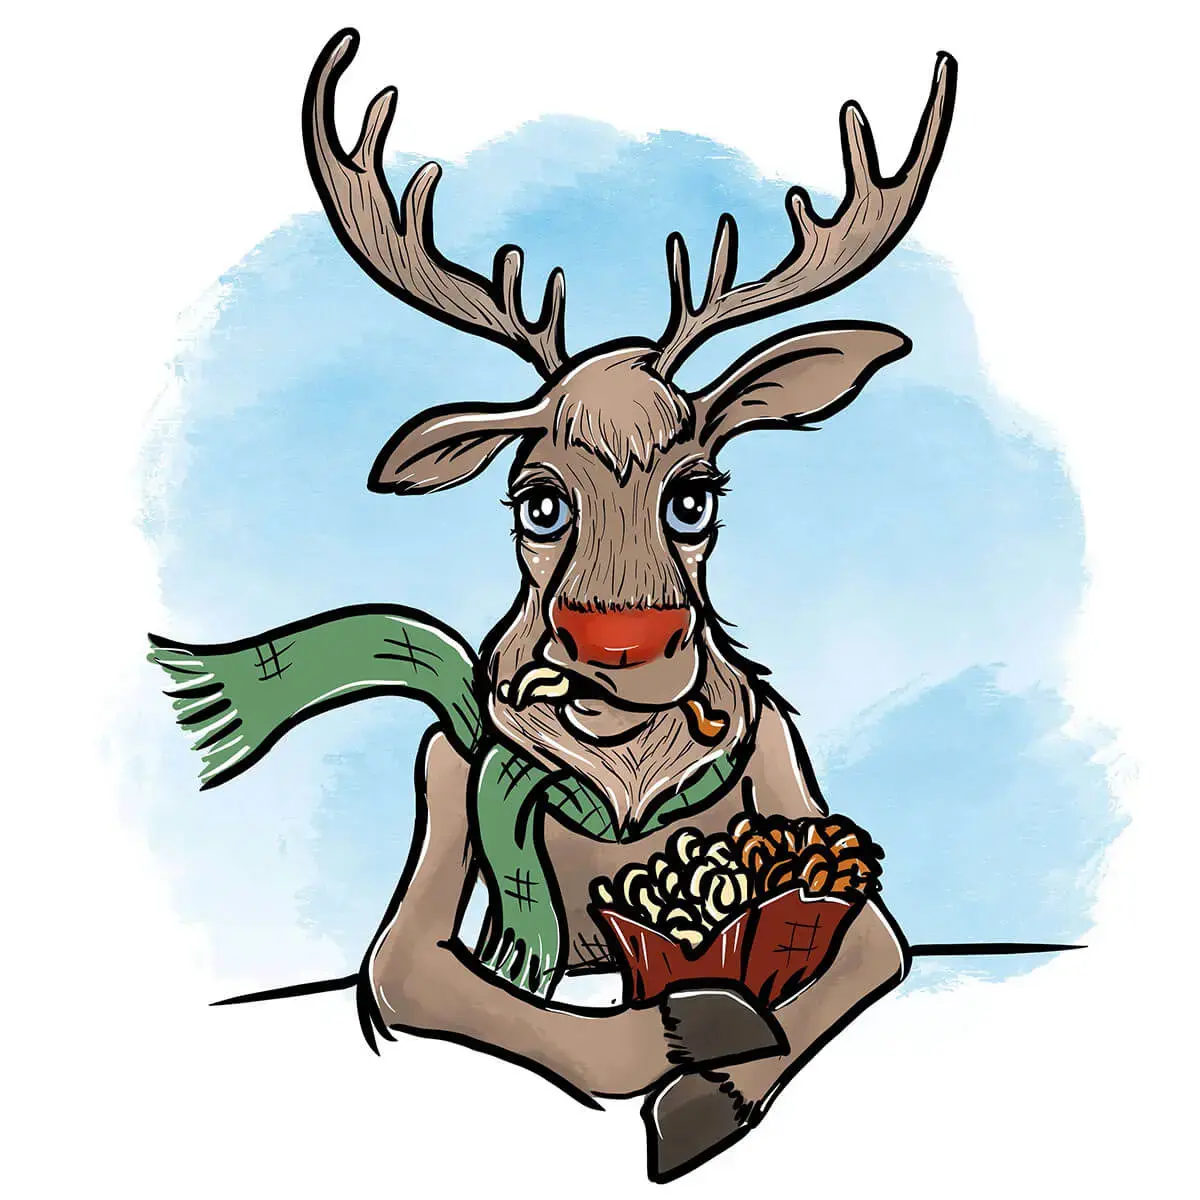 Rudolph with sidewinders